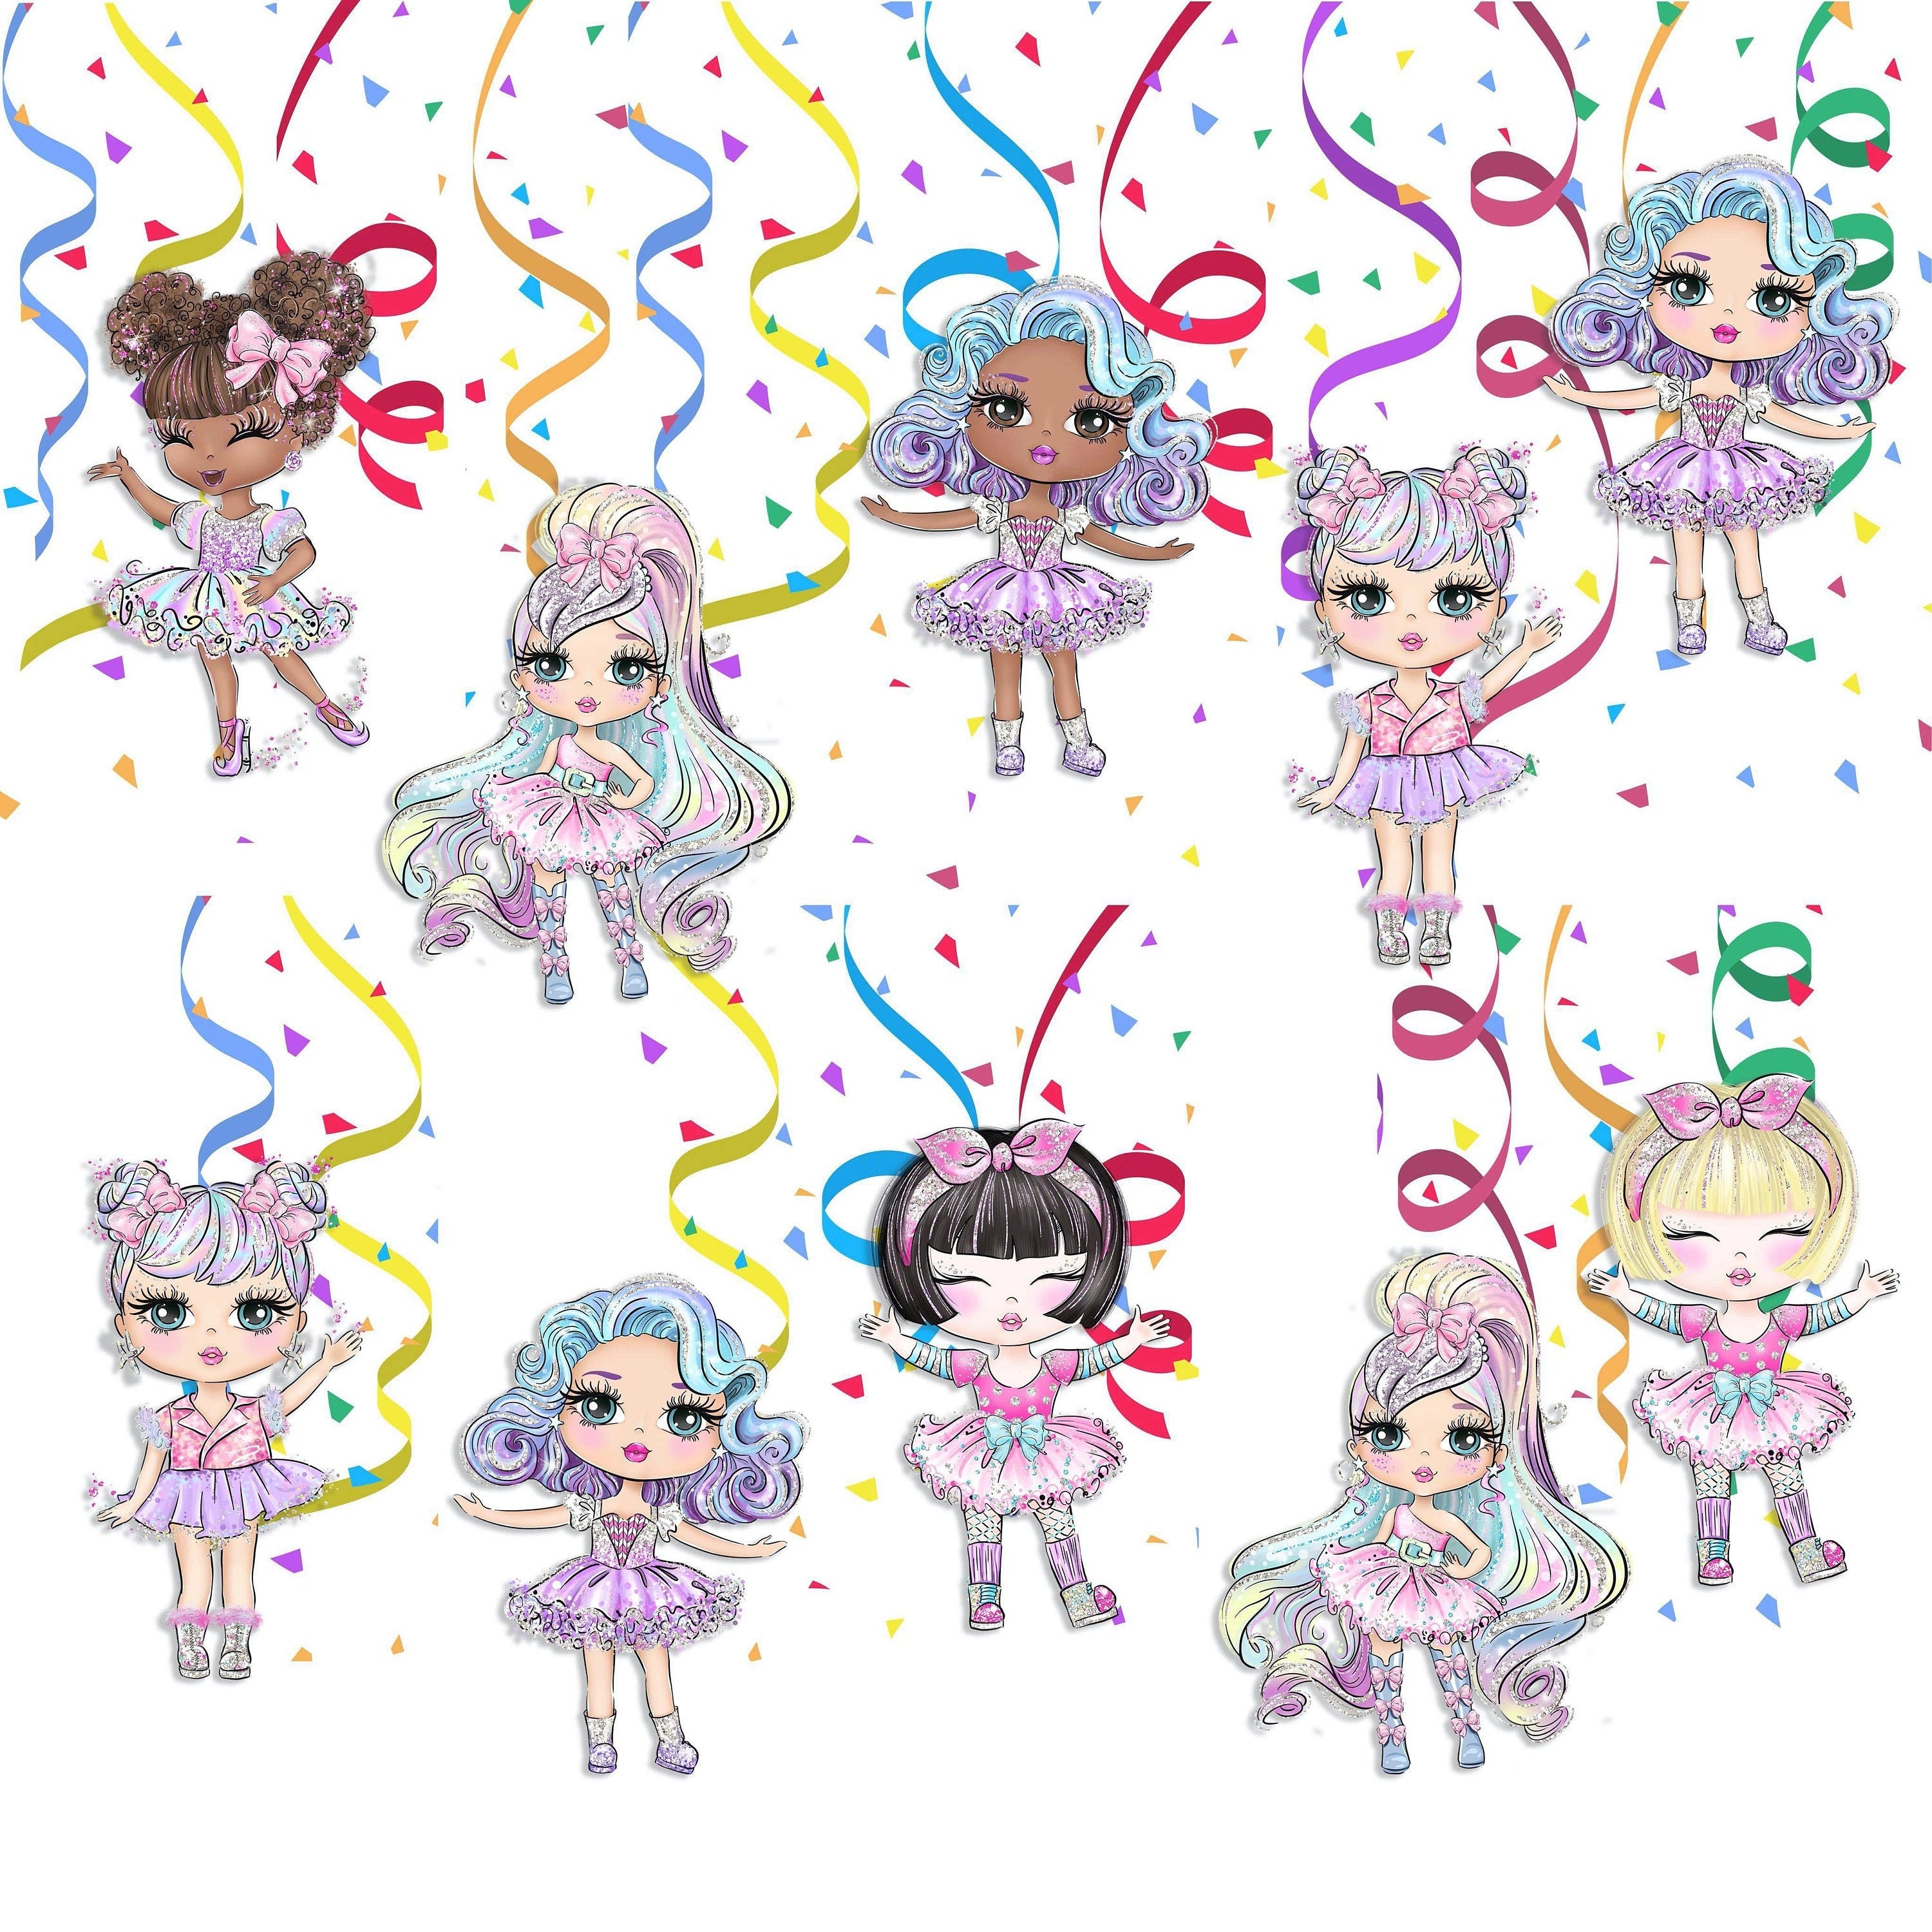 Enchanted Doll Swirl Decorations - Whimsical Fashion Doll Cutouts for Sparkling Party Themes